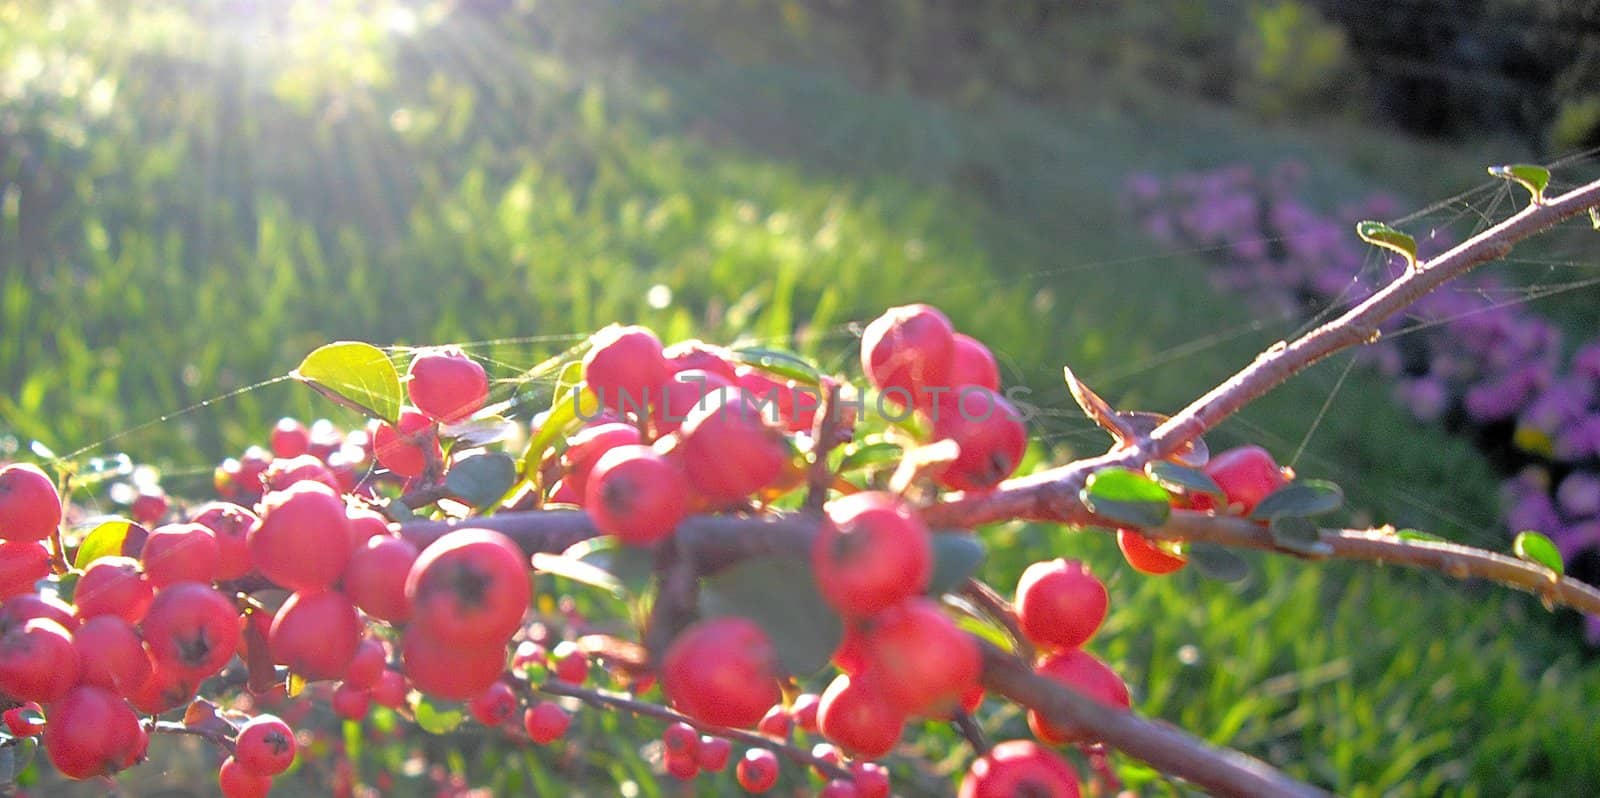 Red berries on the sunlight by Elet